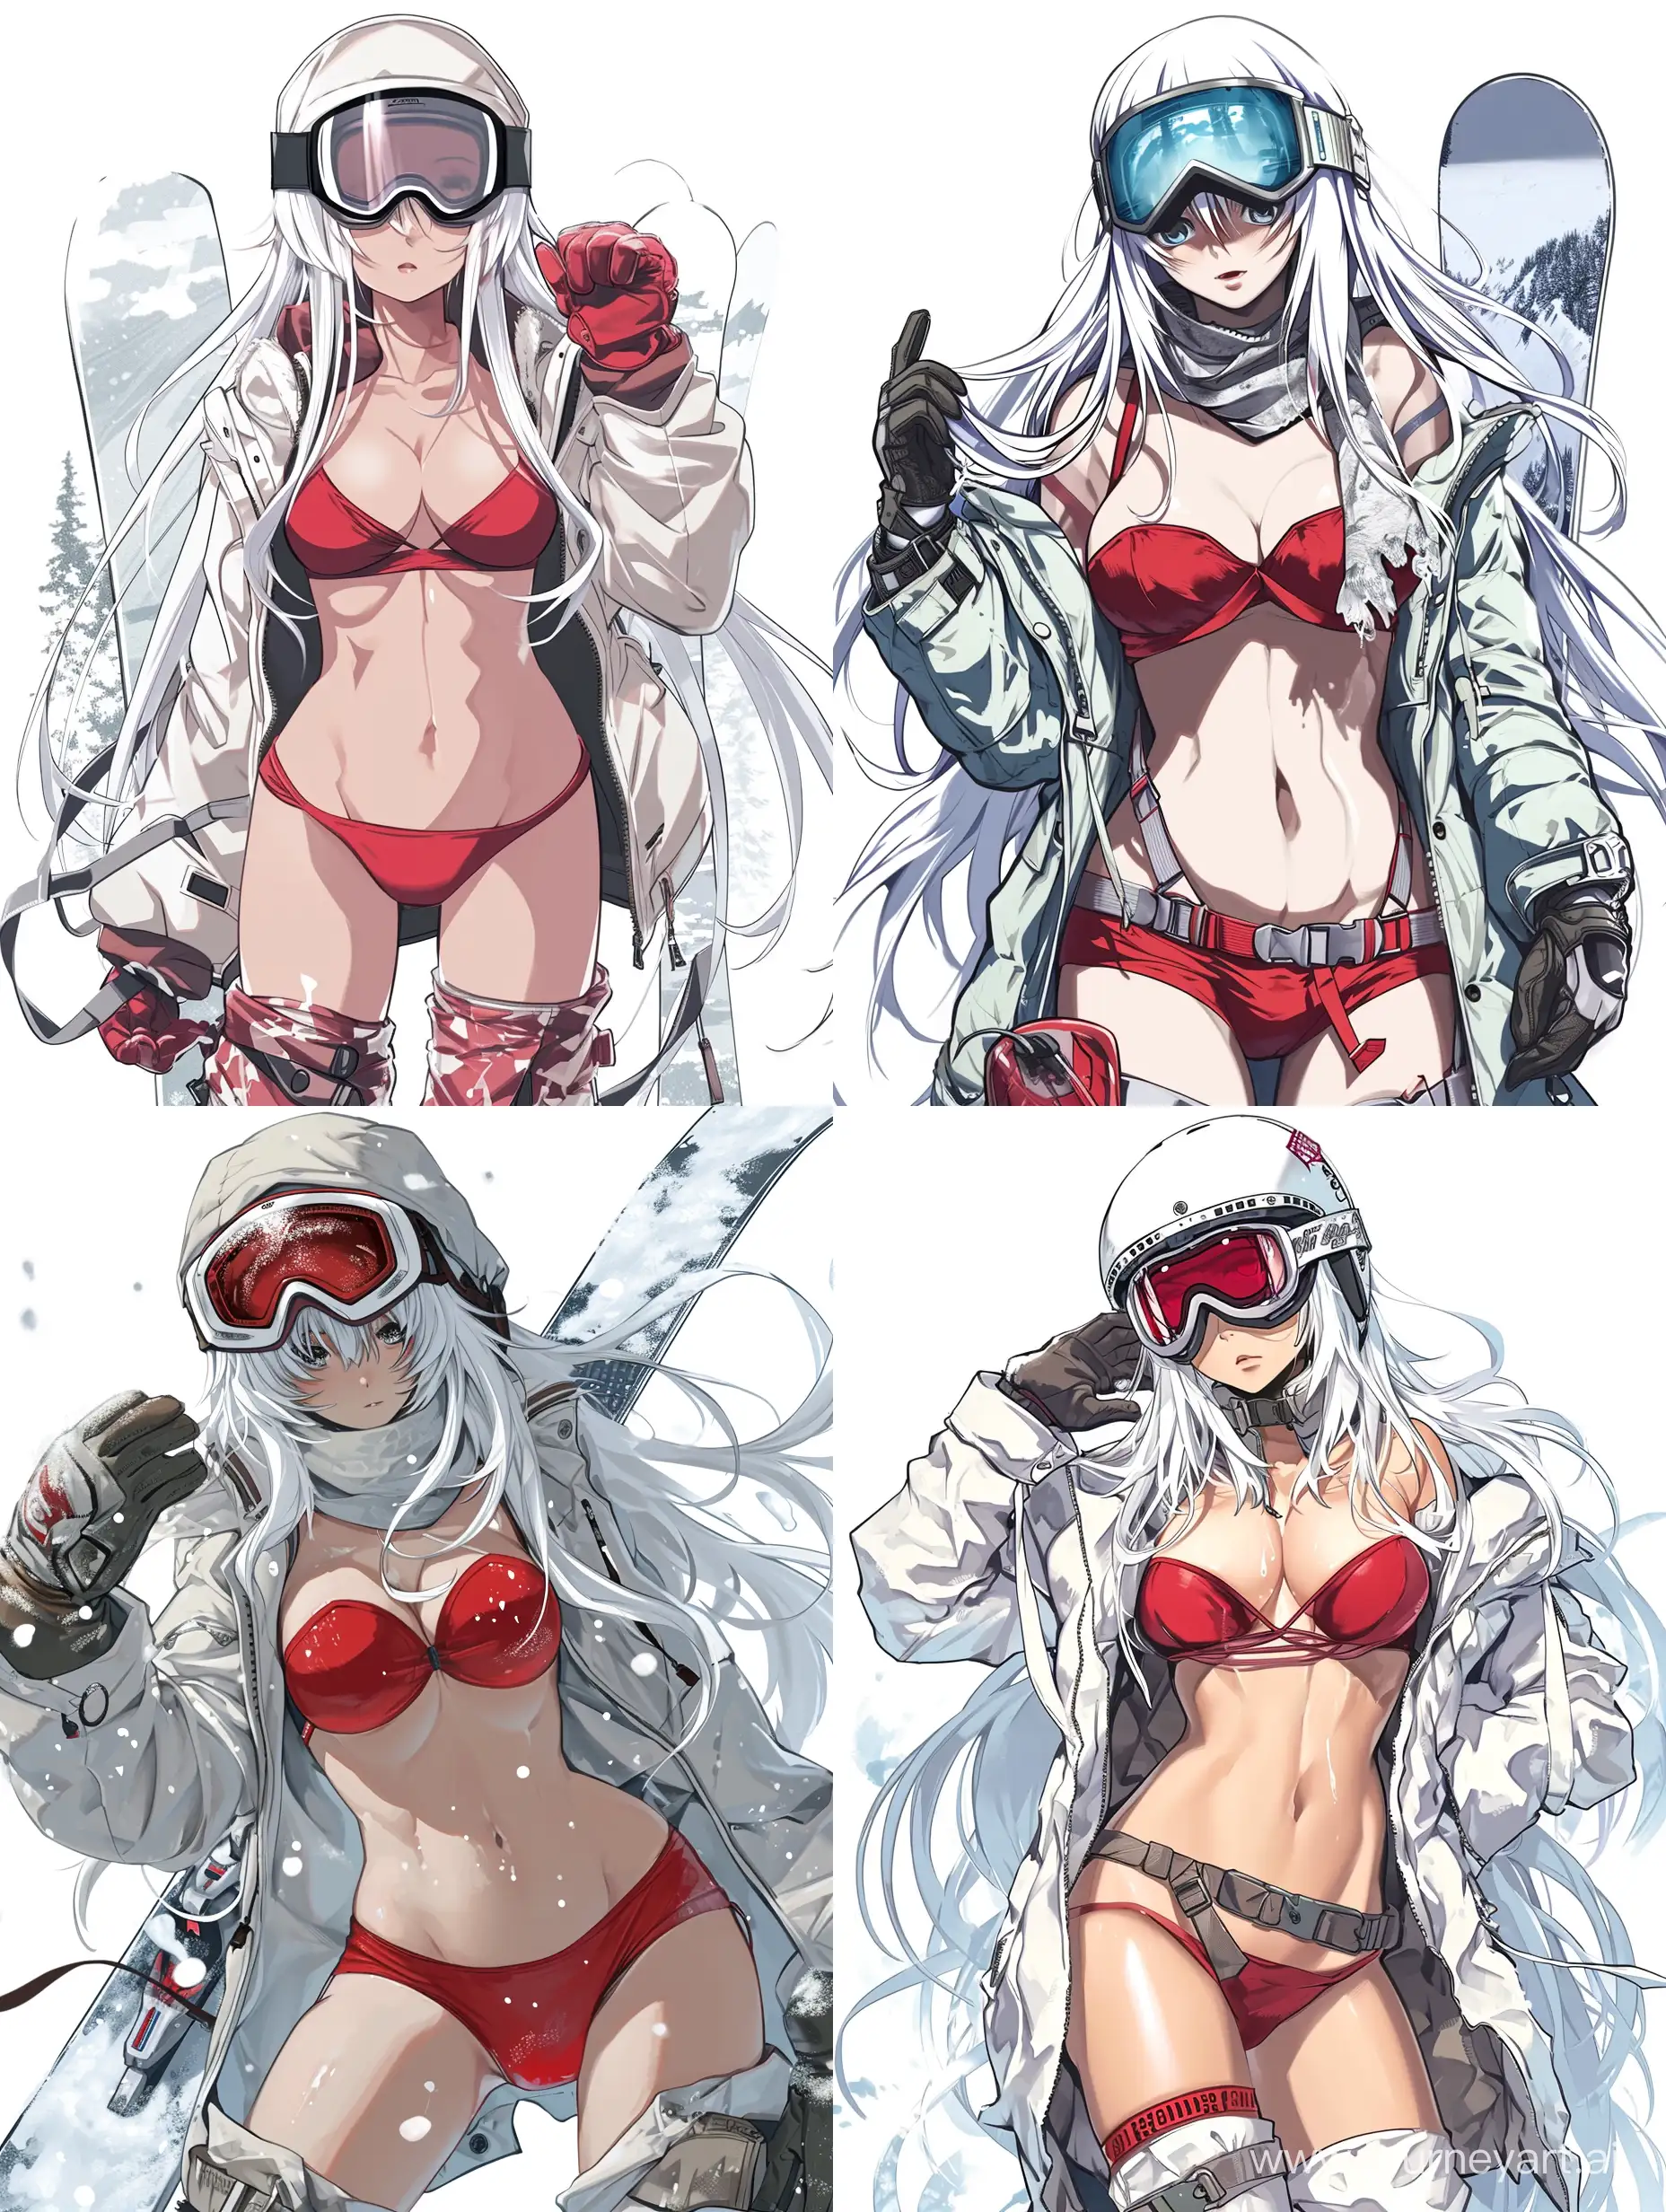 Stylish-Manga-Character-in-Winter-Sports-Gear-White-Hair-and-Red-Bras